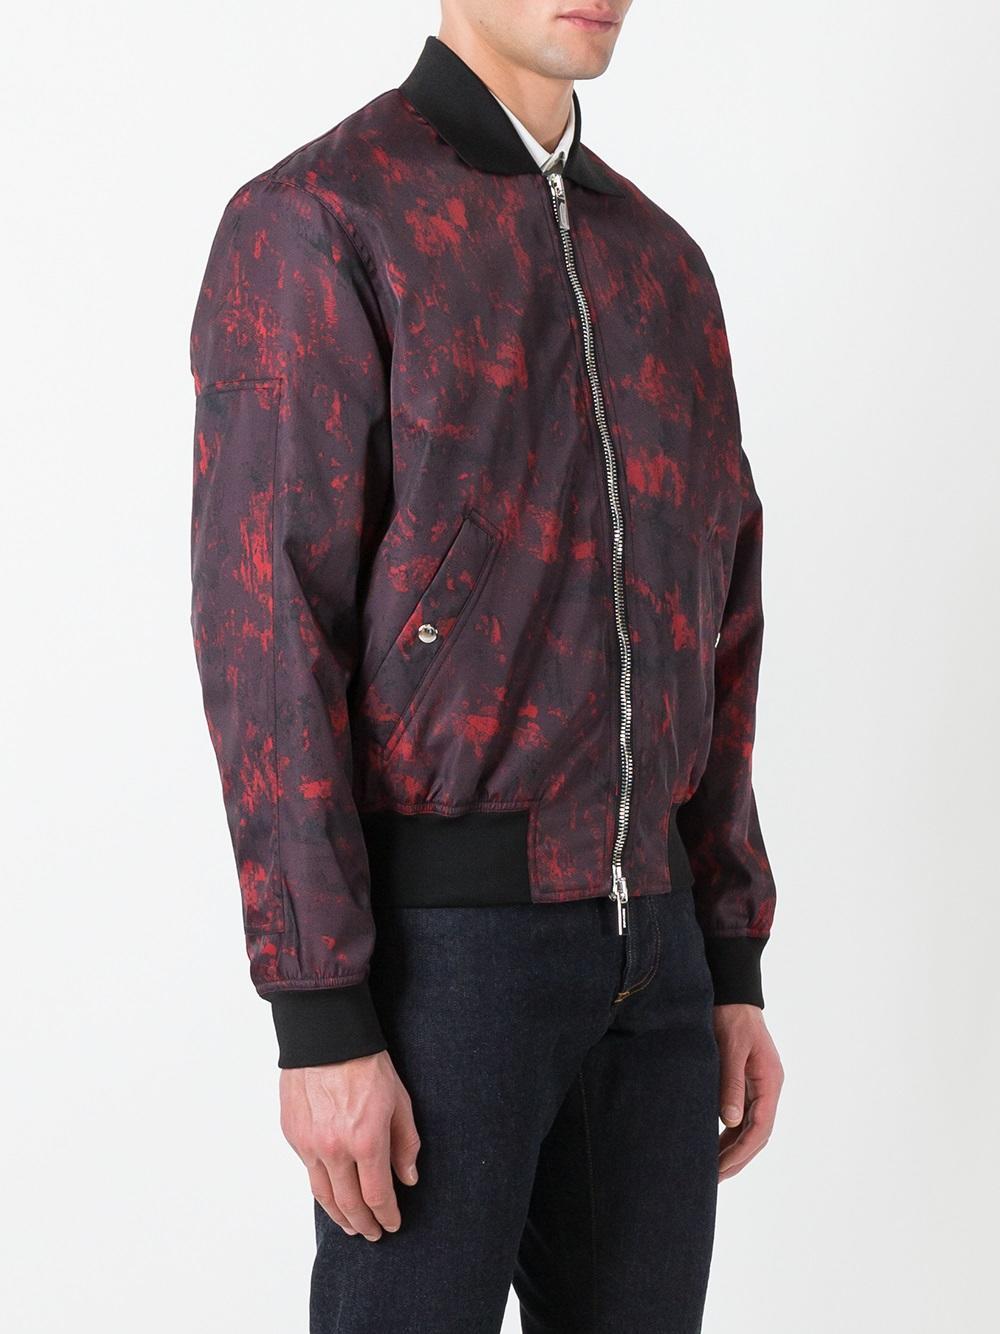 Dior Homme Abstract Print Bomber Jacket in Red for Men | Lyst